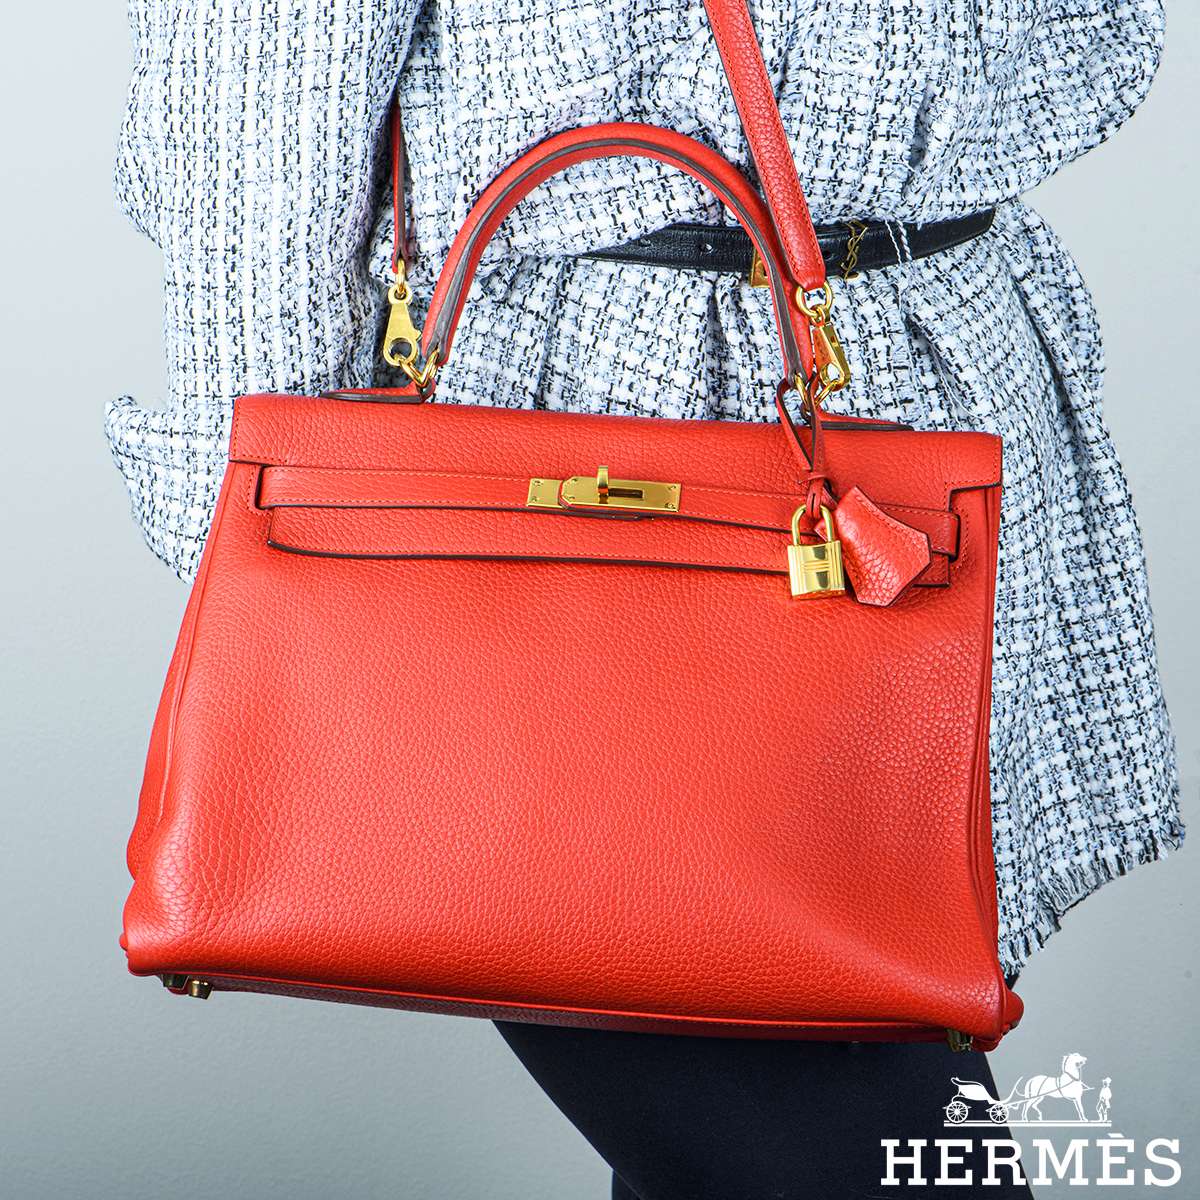 Hermès Kelly 35cm Clemence Rogue Tomate GHW